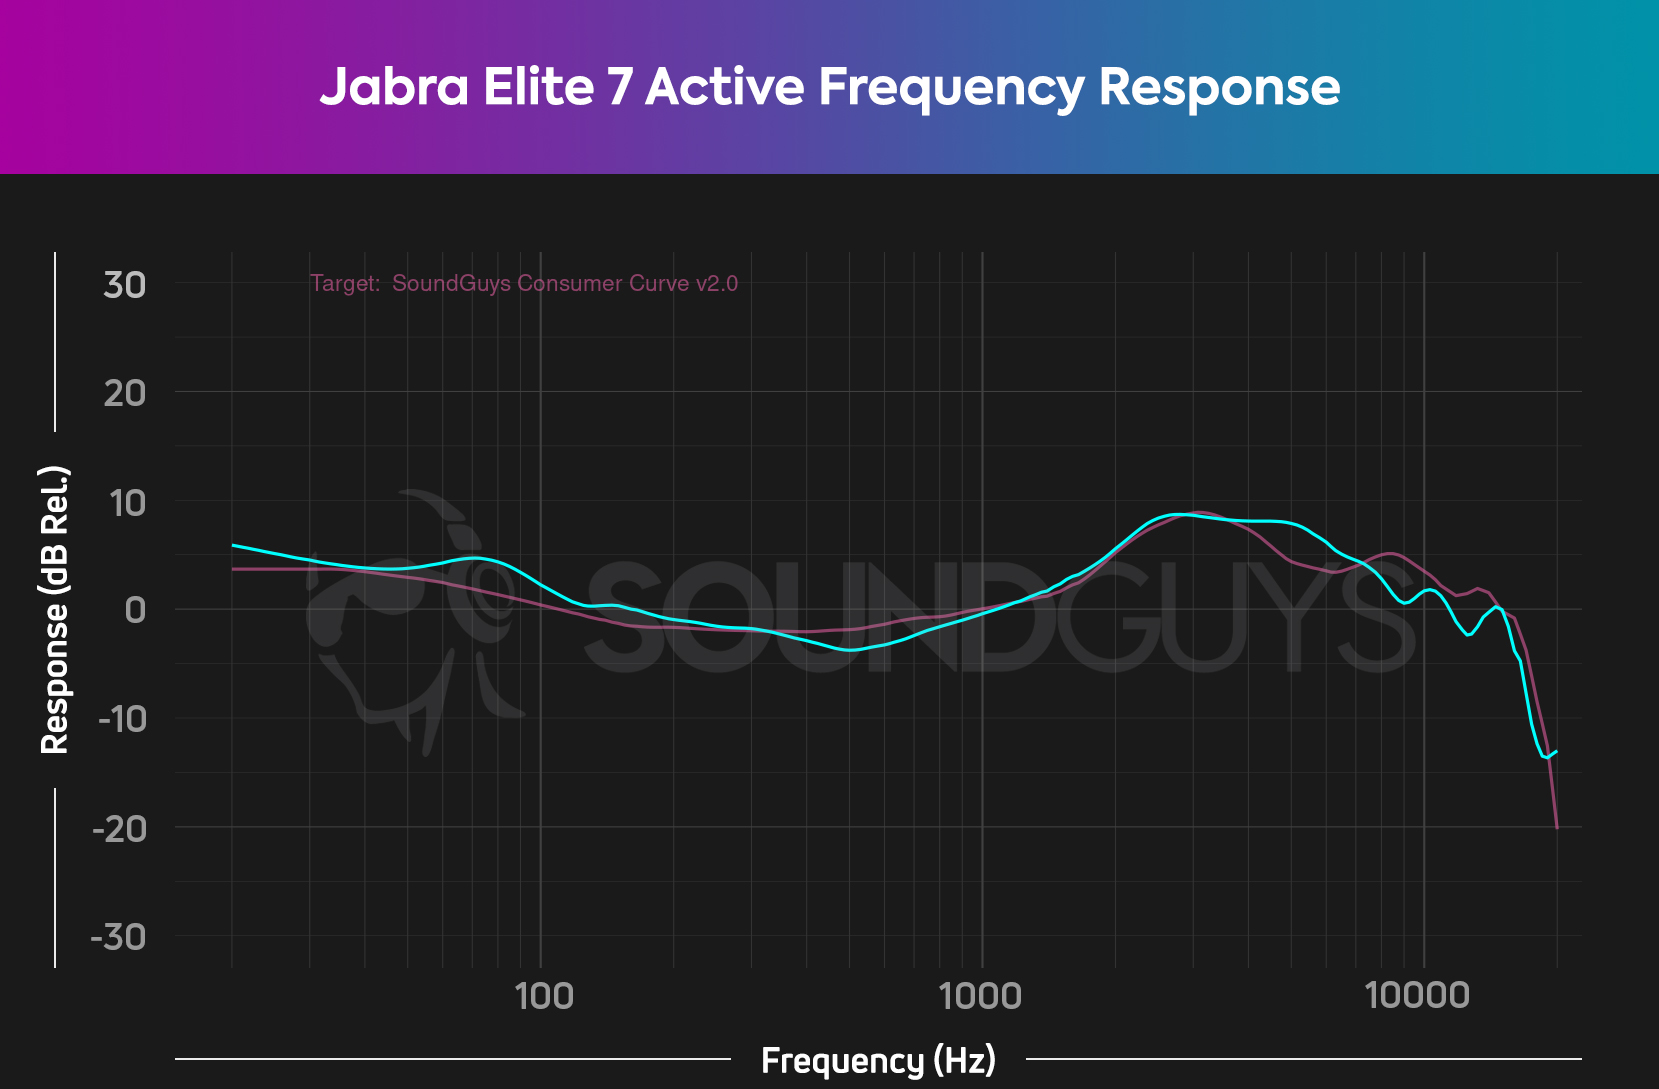 A chart showing the frequency response of the Jabra Elite 7 Active closely aligning with our house consumer curve.